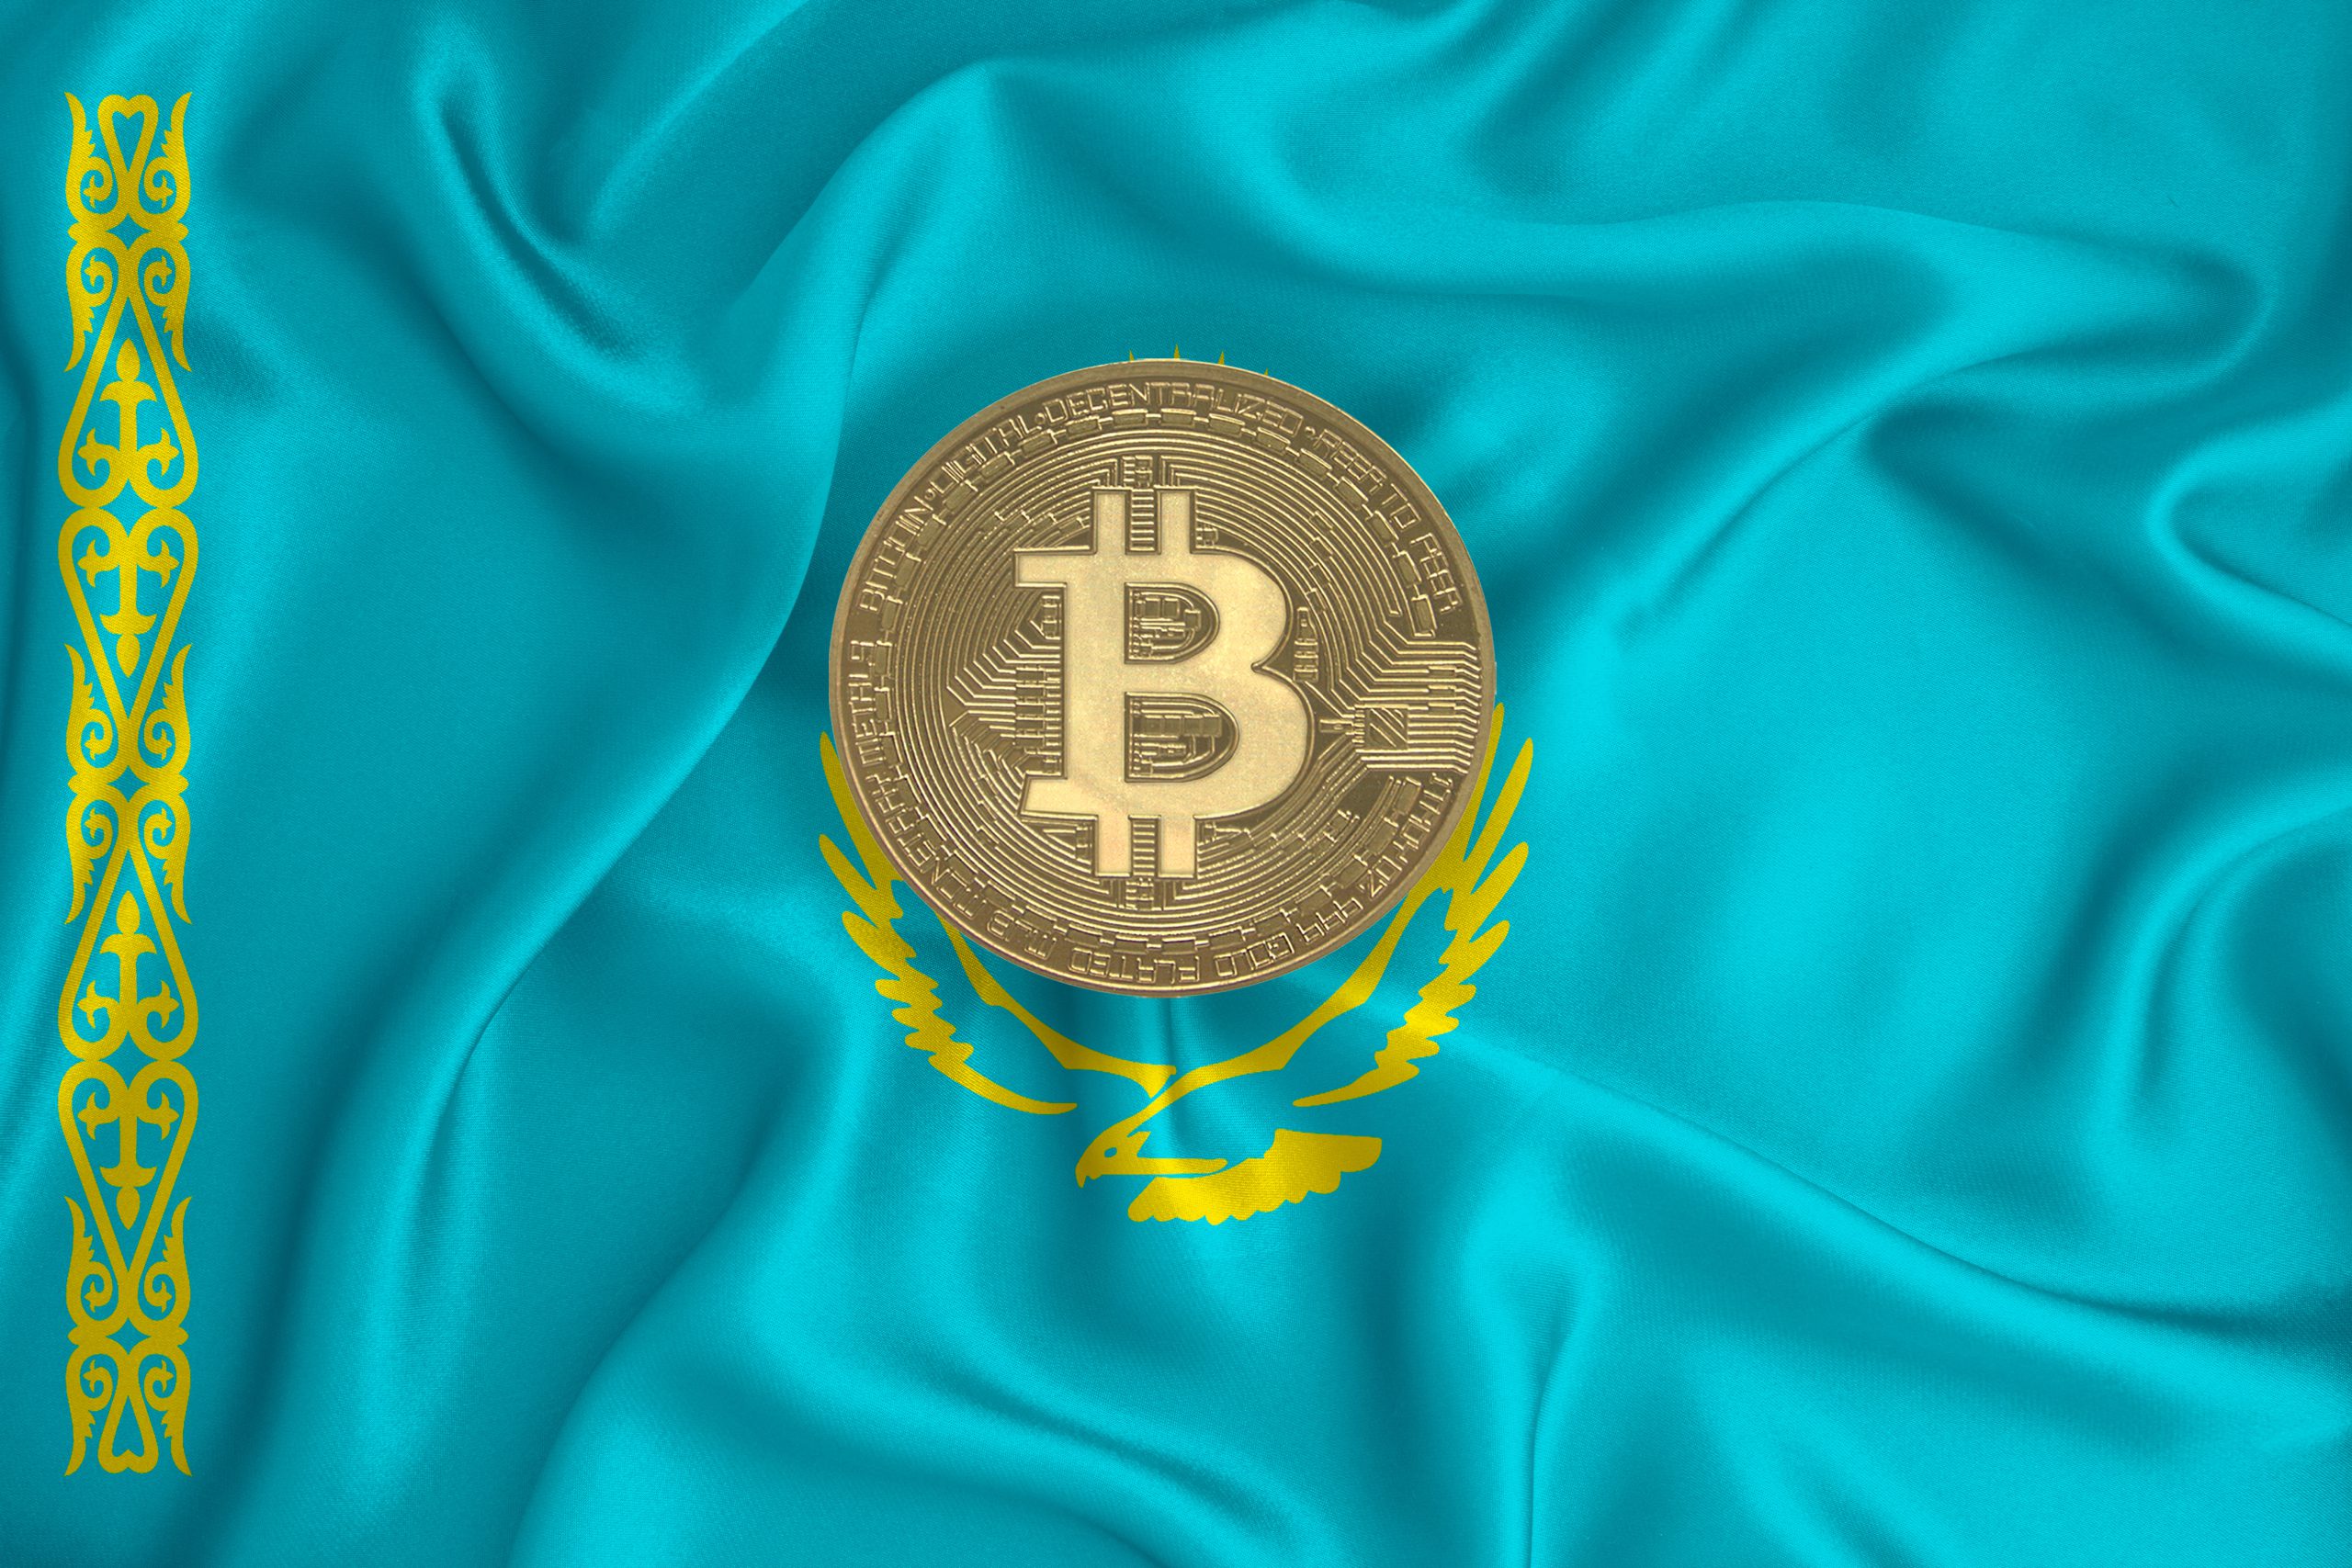 Kazakhstan seems ready for the legalization of crypto
